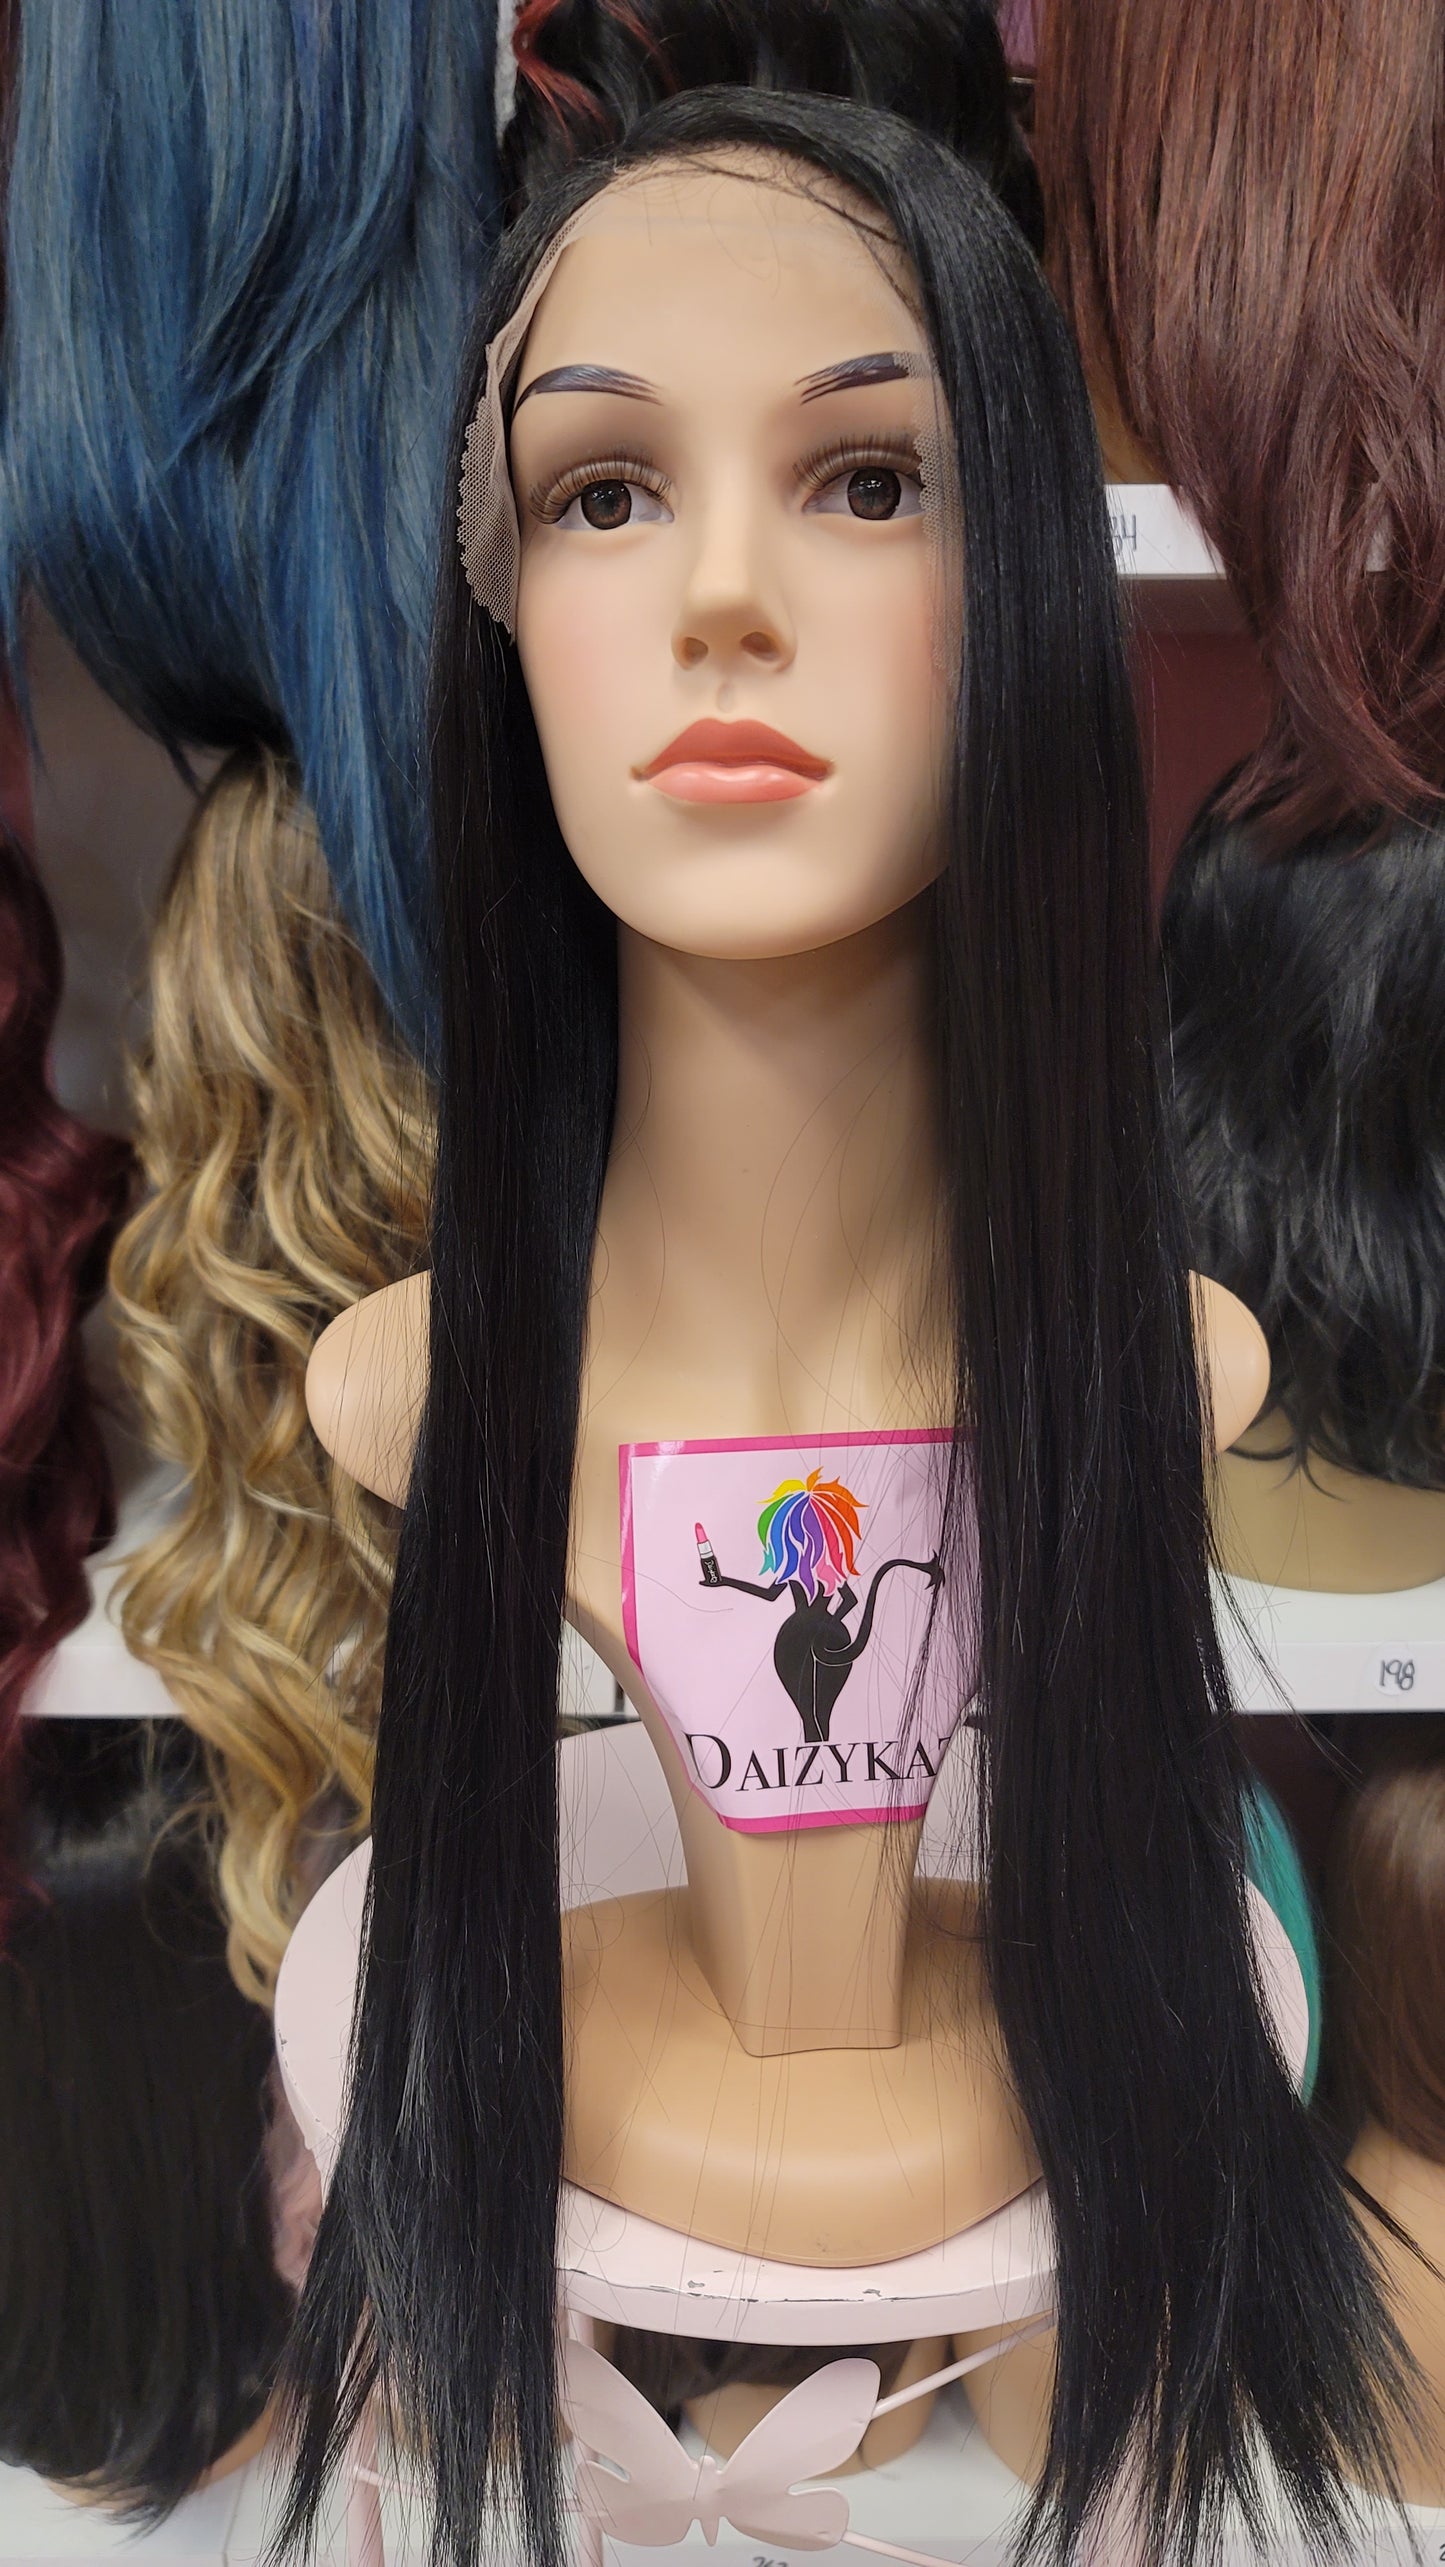 243 CASSIE - Left Part Lace Front Wig - 1B - DaizyKat Cosmetics 243 CASSIE - Left Part Lace Front Wig - 1B DaizyKat Cosmetics Wigs